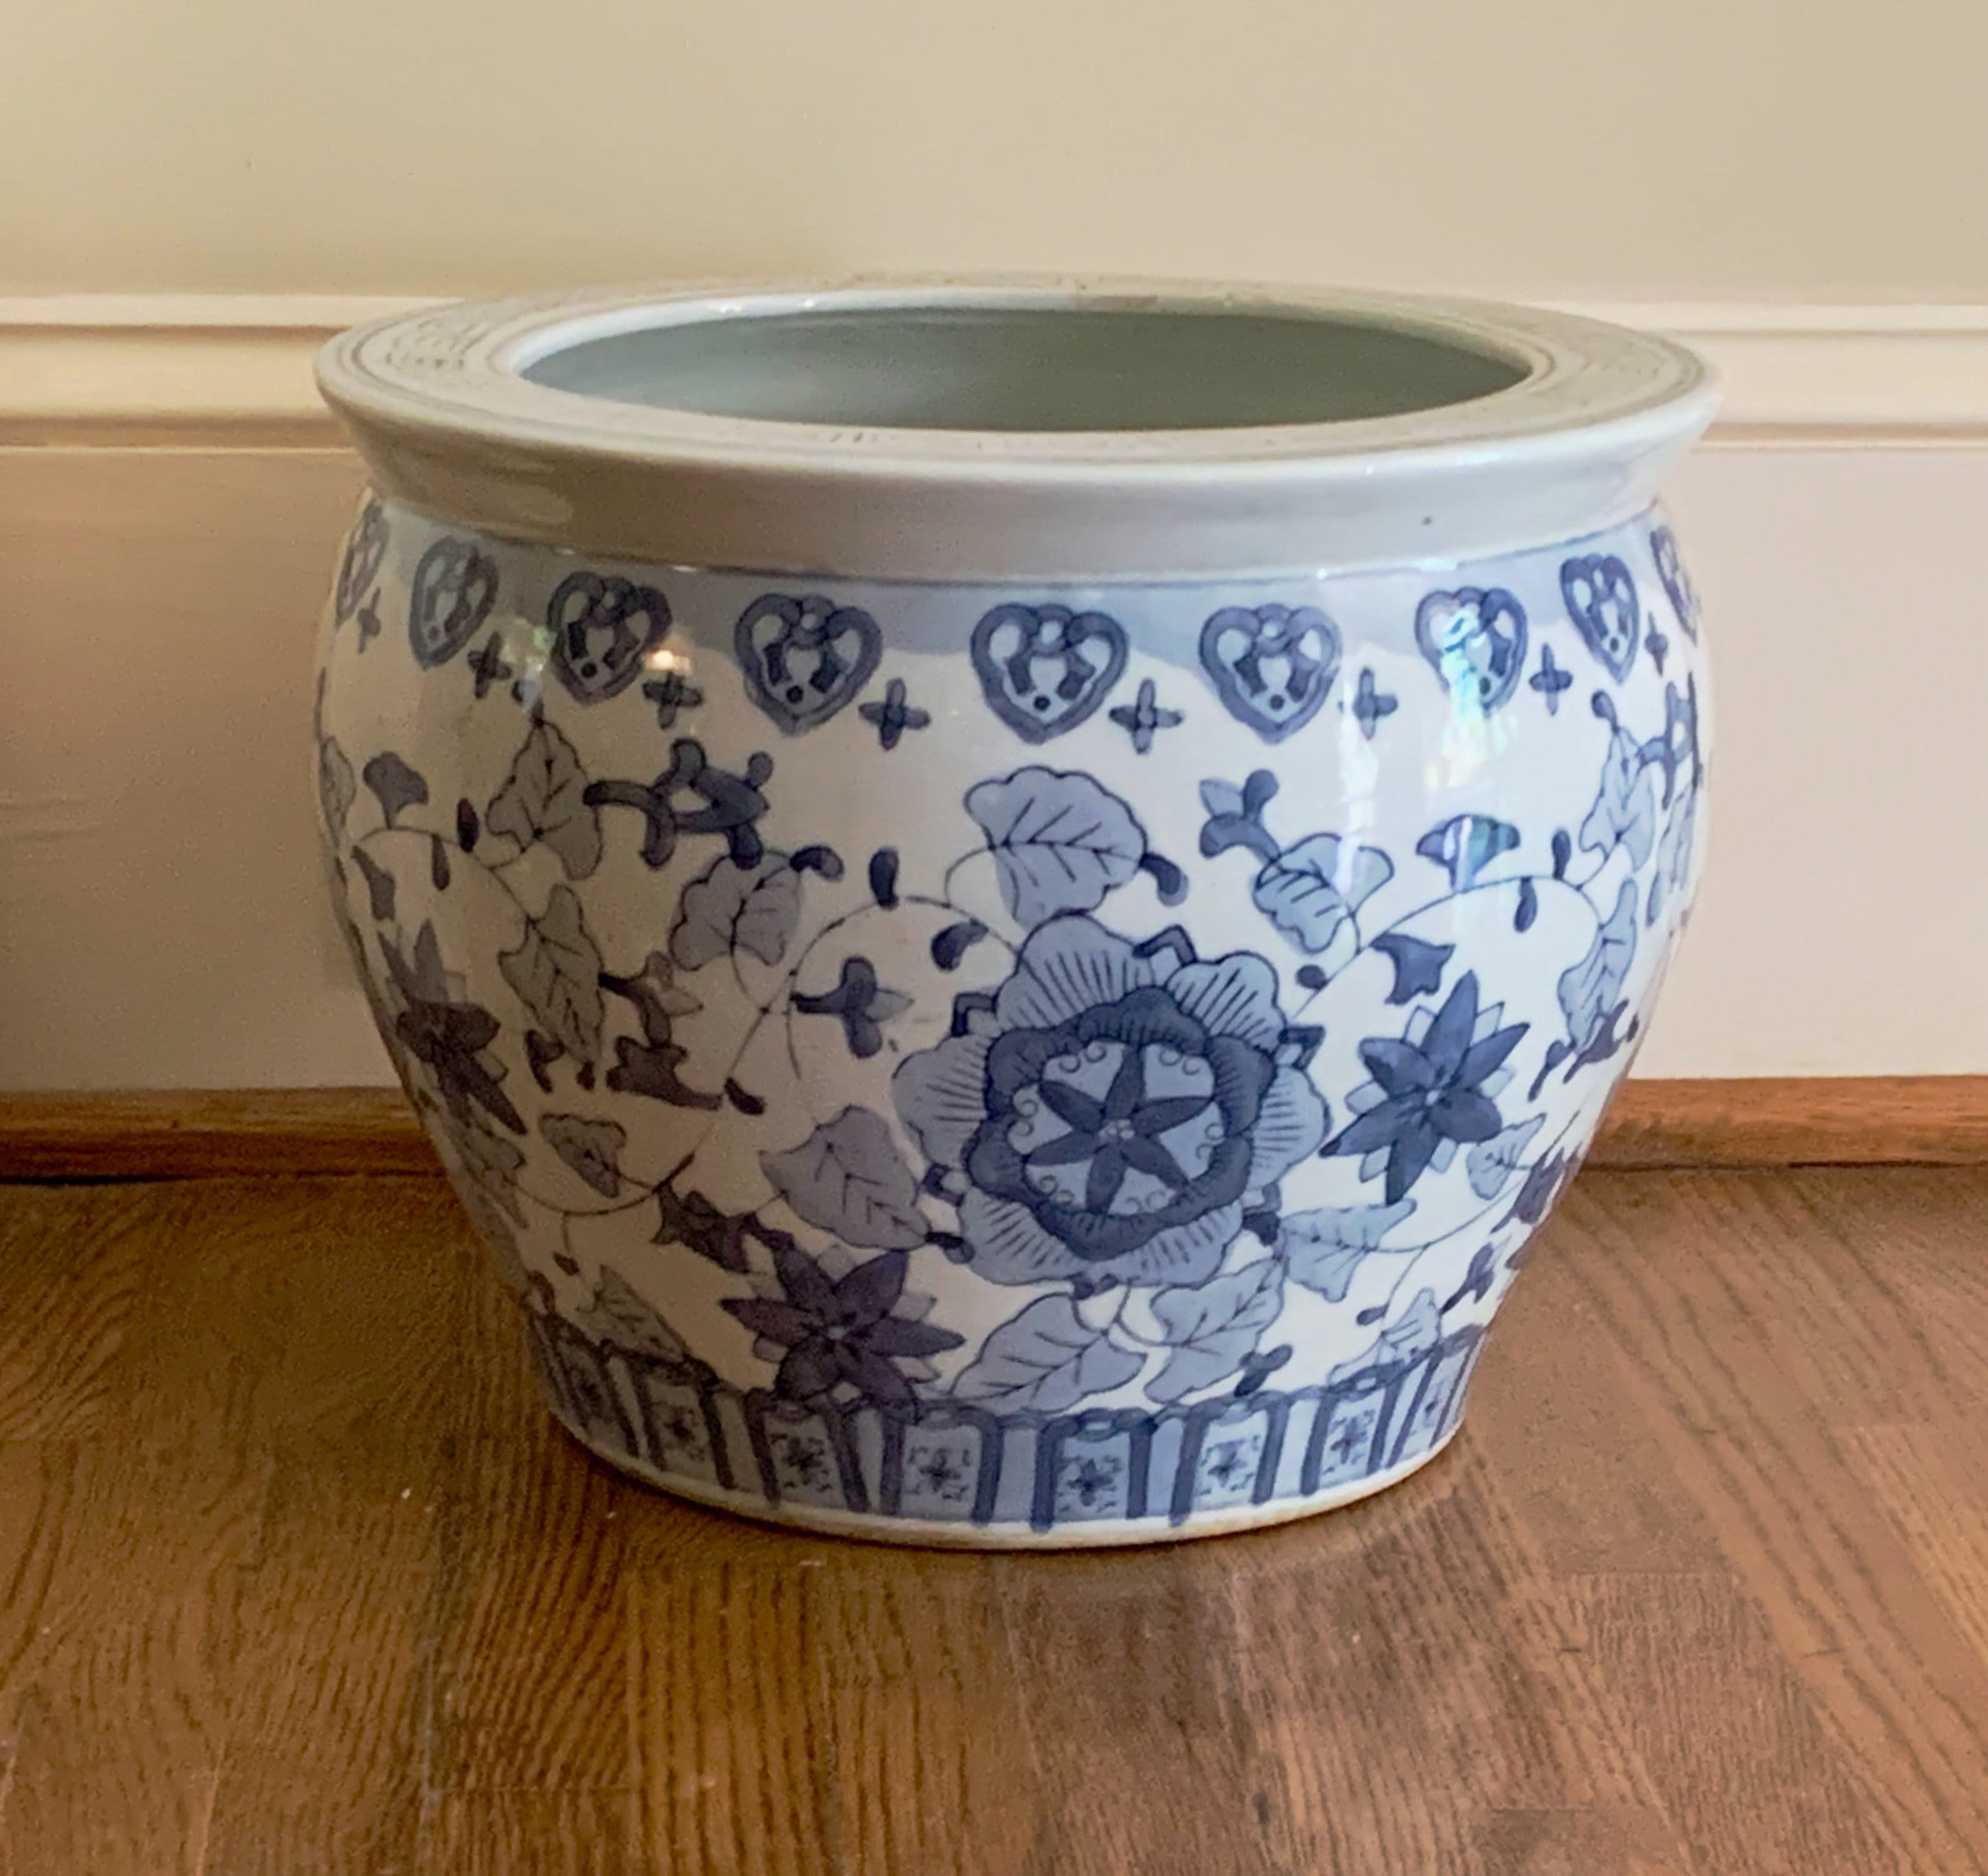 Large Mid Century Chinoiserie Ceramic Blue and White Planter